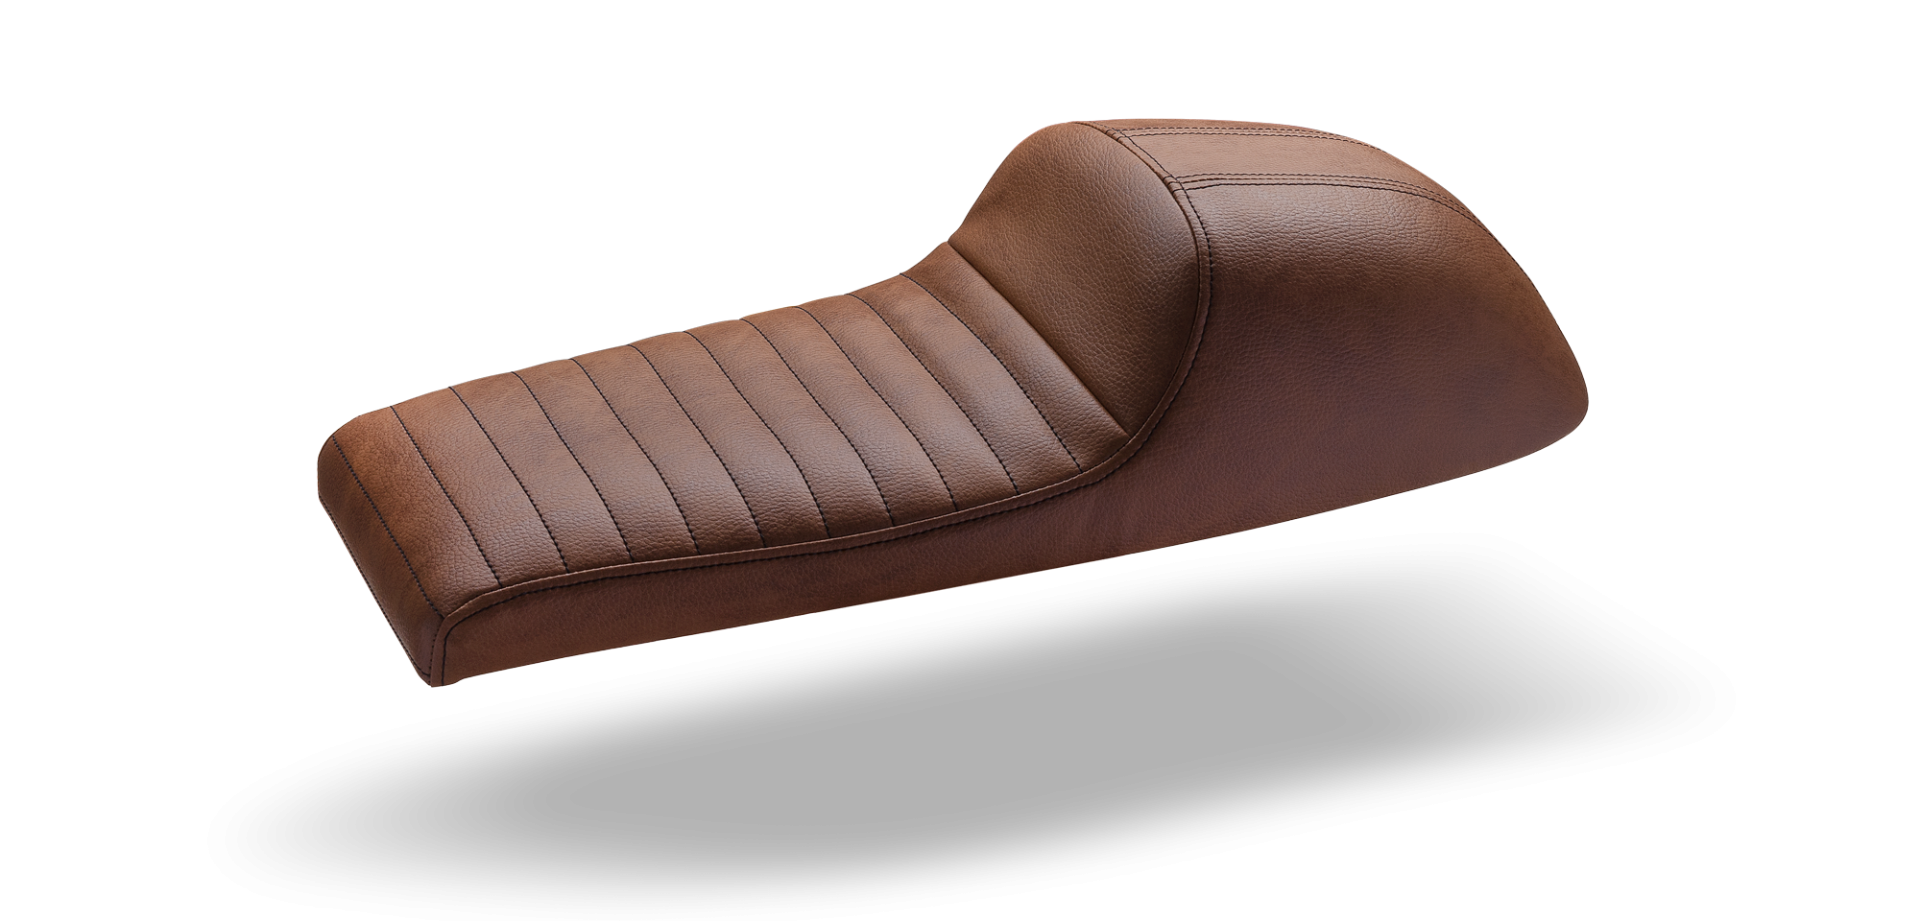 "FT Classic" Universal Cafe Racer seat (brown)